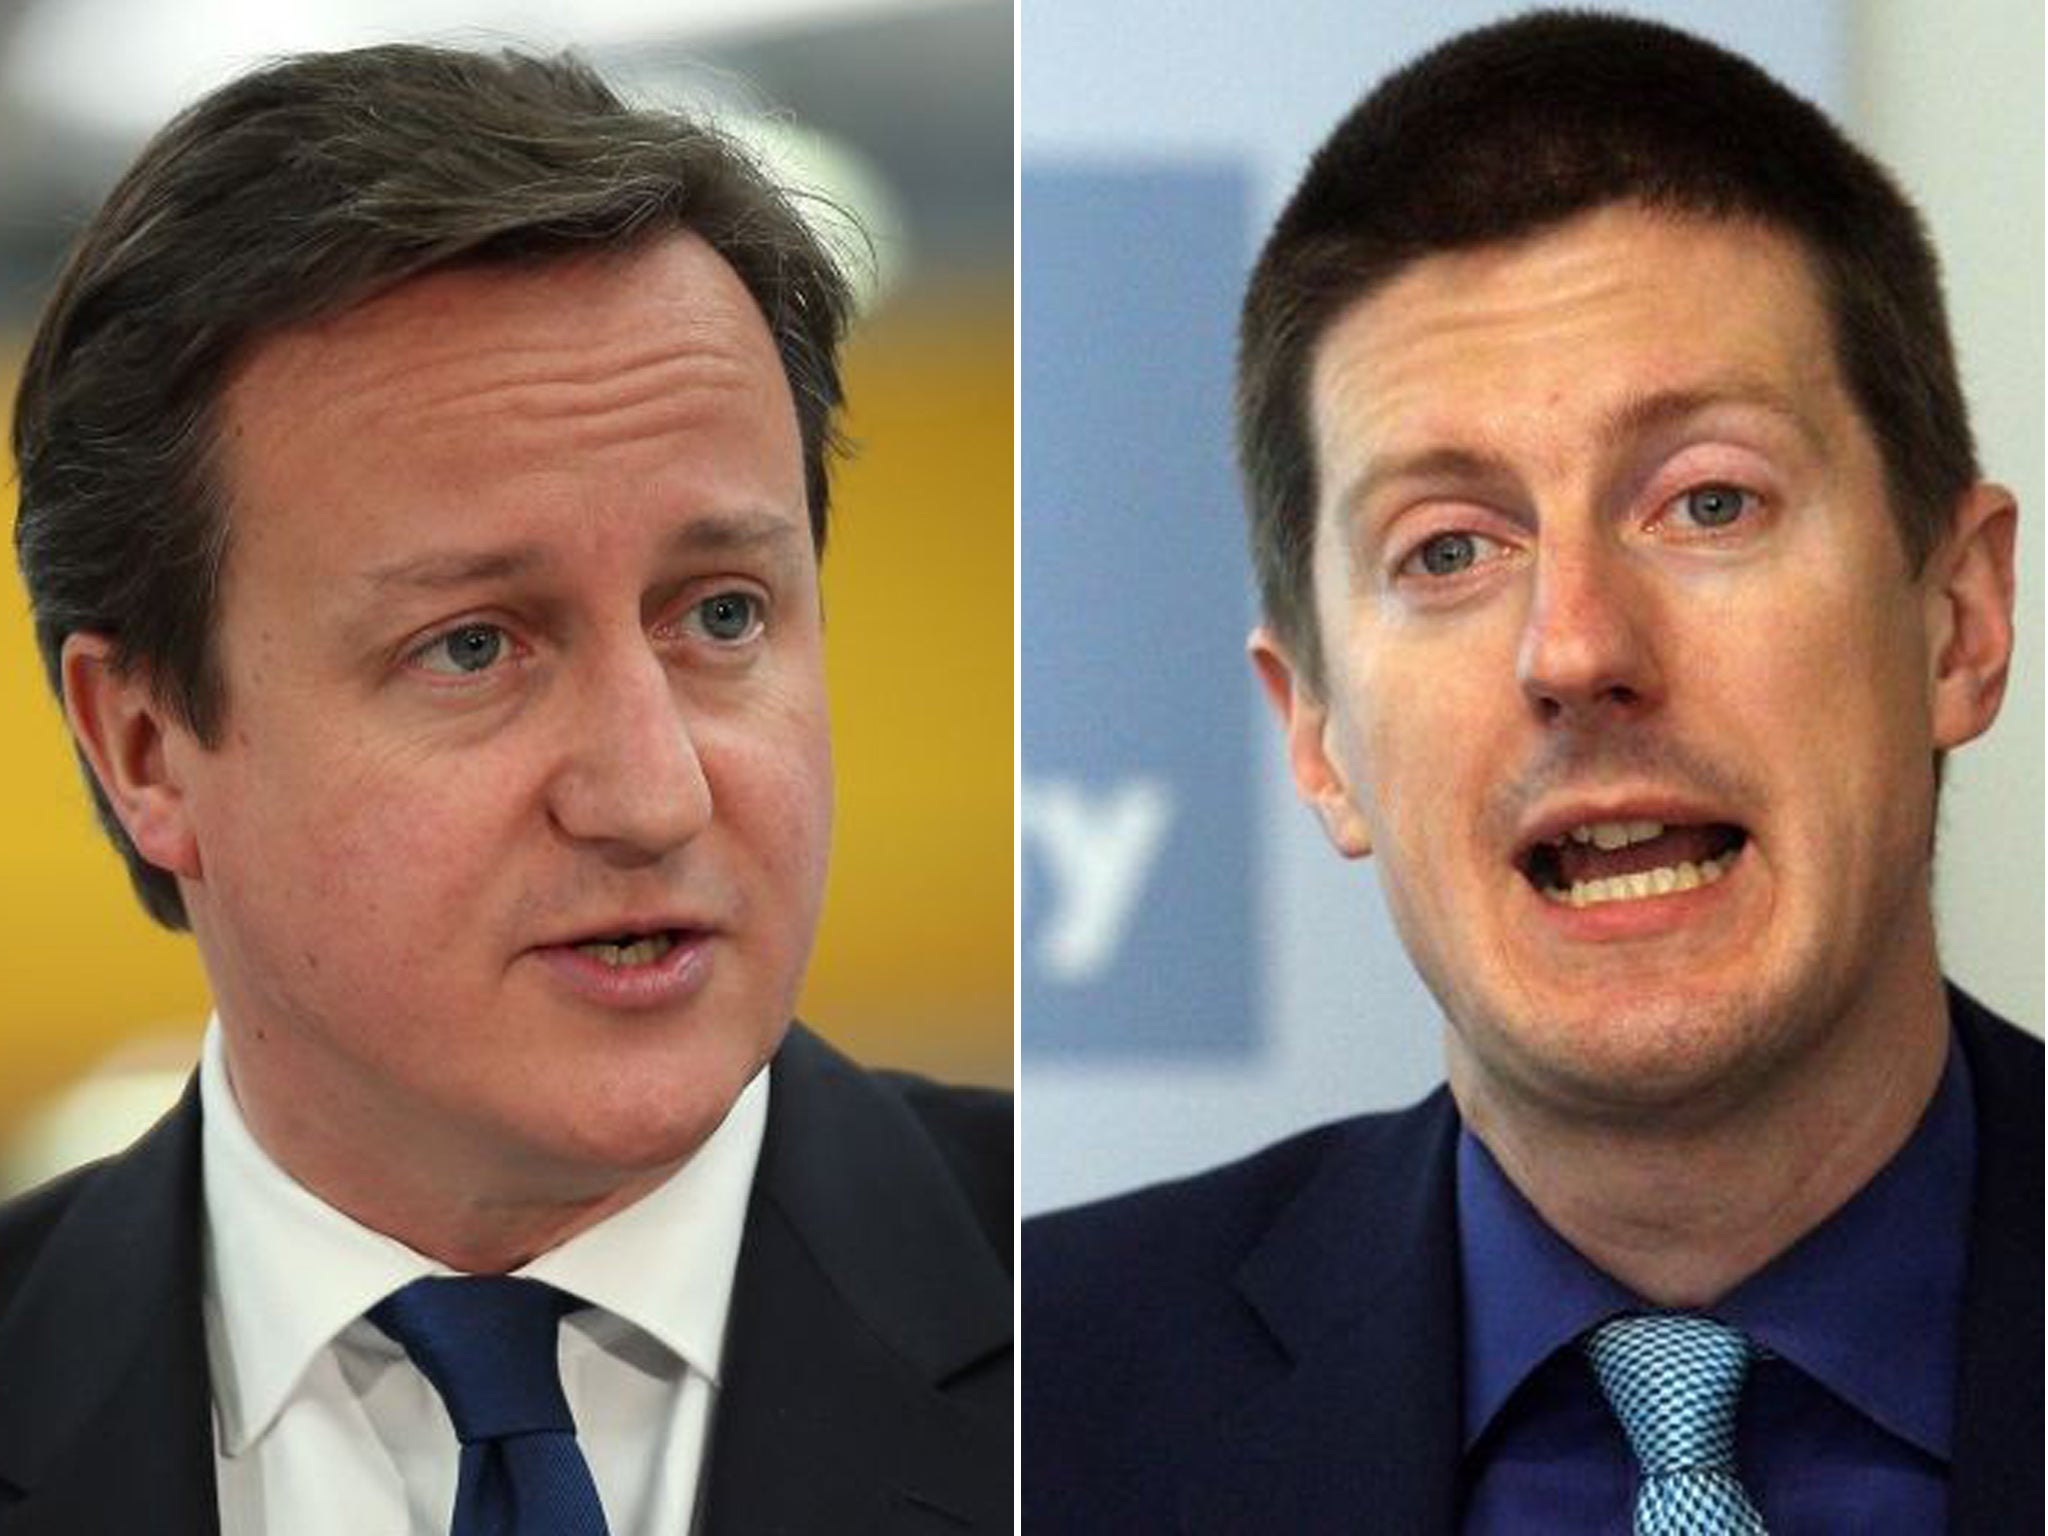 Robert Chote, right, has rebuked David Cameron for misrepresenting its position on the impact of austerity measures